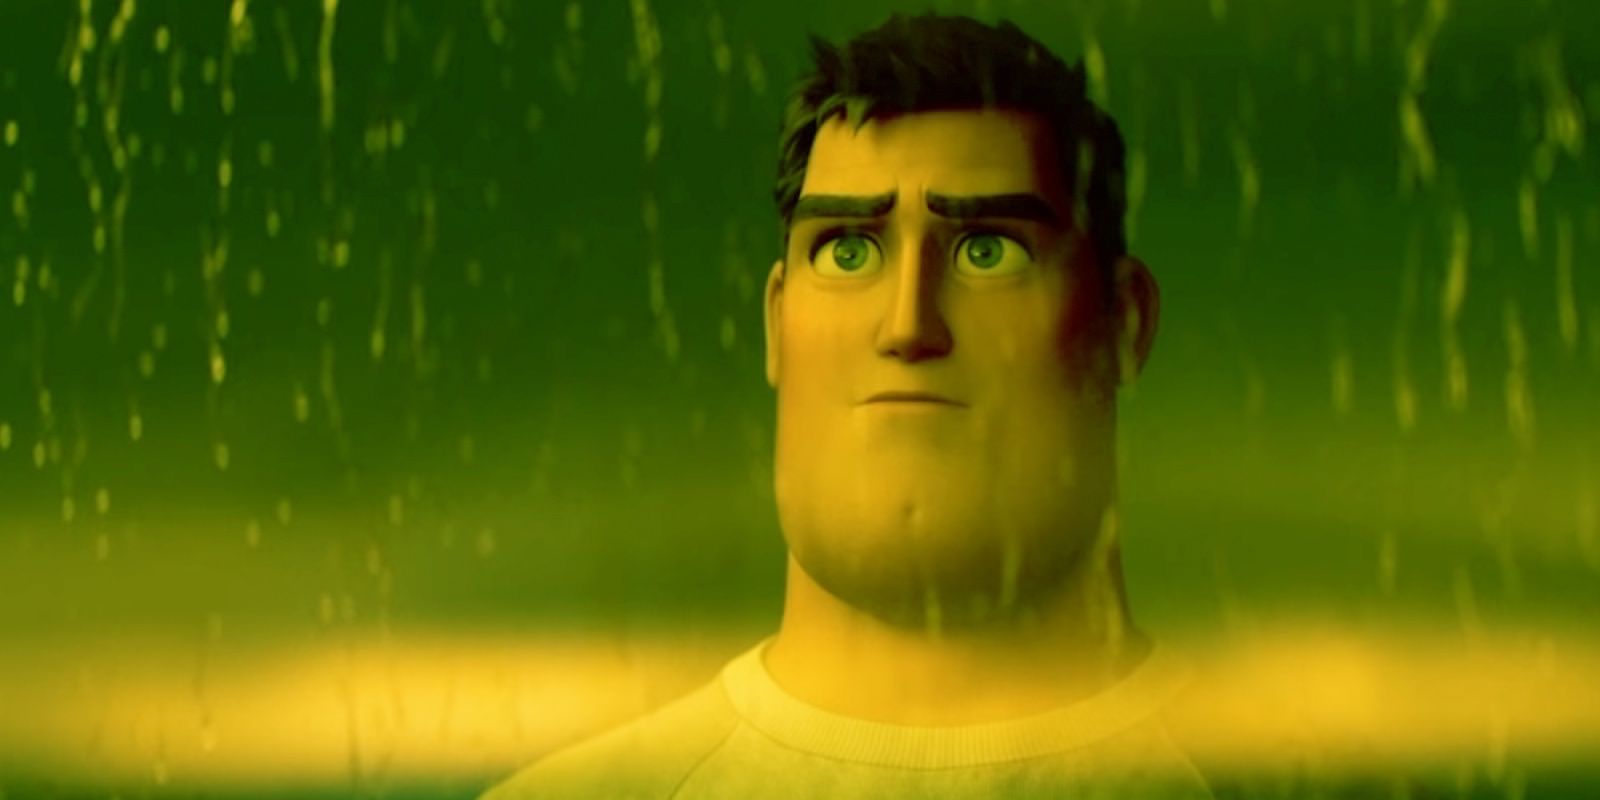 Buzz looking out the window on a rainy day in the Lightyear Trailer